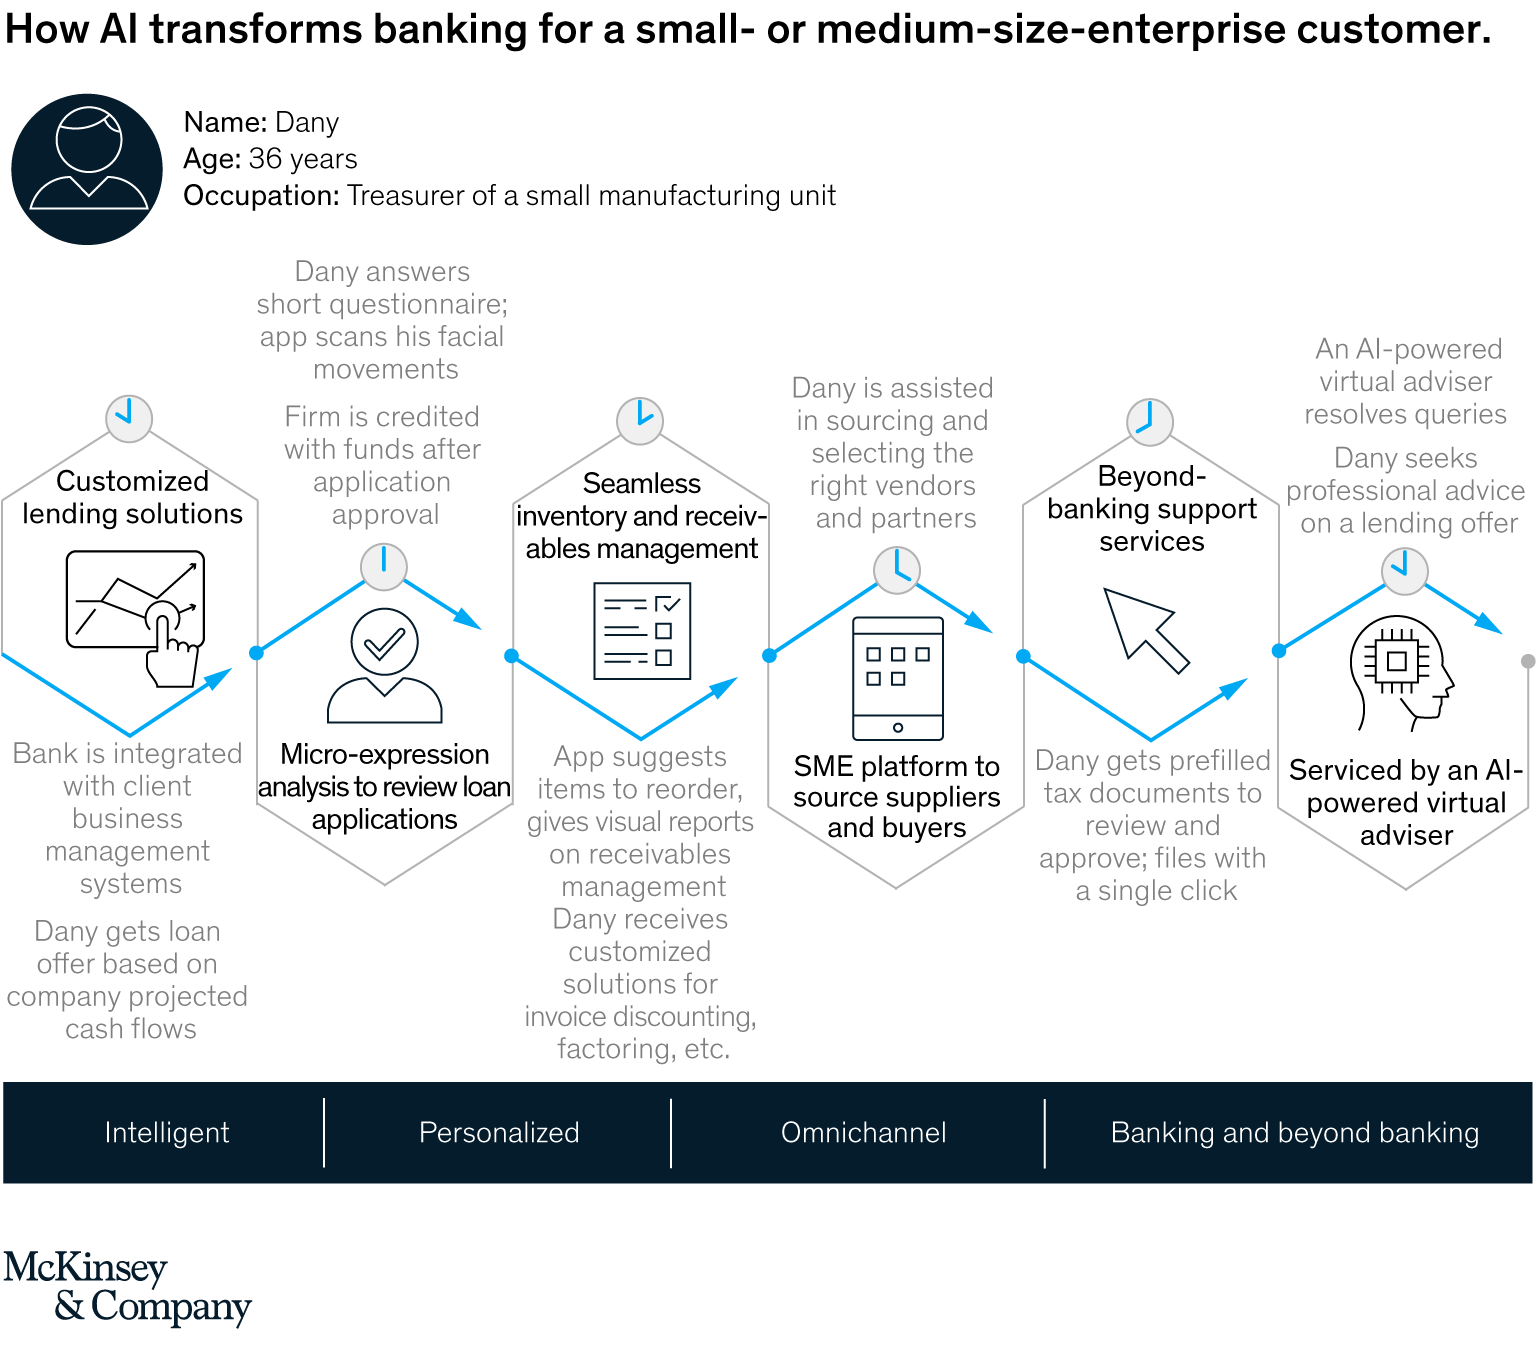 How AI transforms banking for a small- and medium-sized enterprise customer, AI-bank of the future: Can banks meet the AI challenge, McKinsey & Company, September 2020